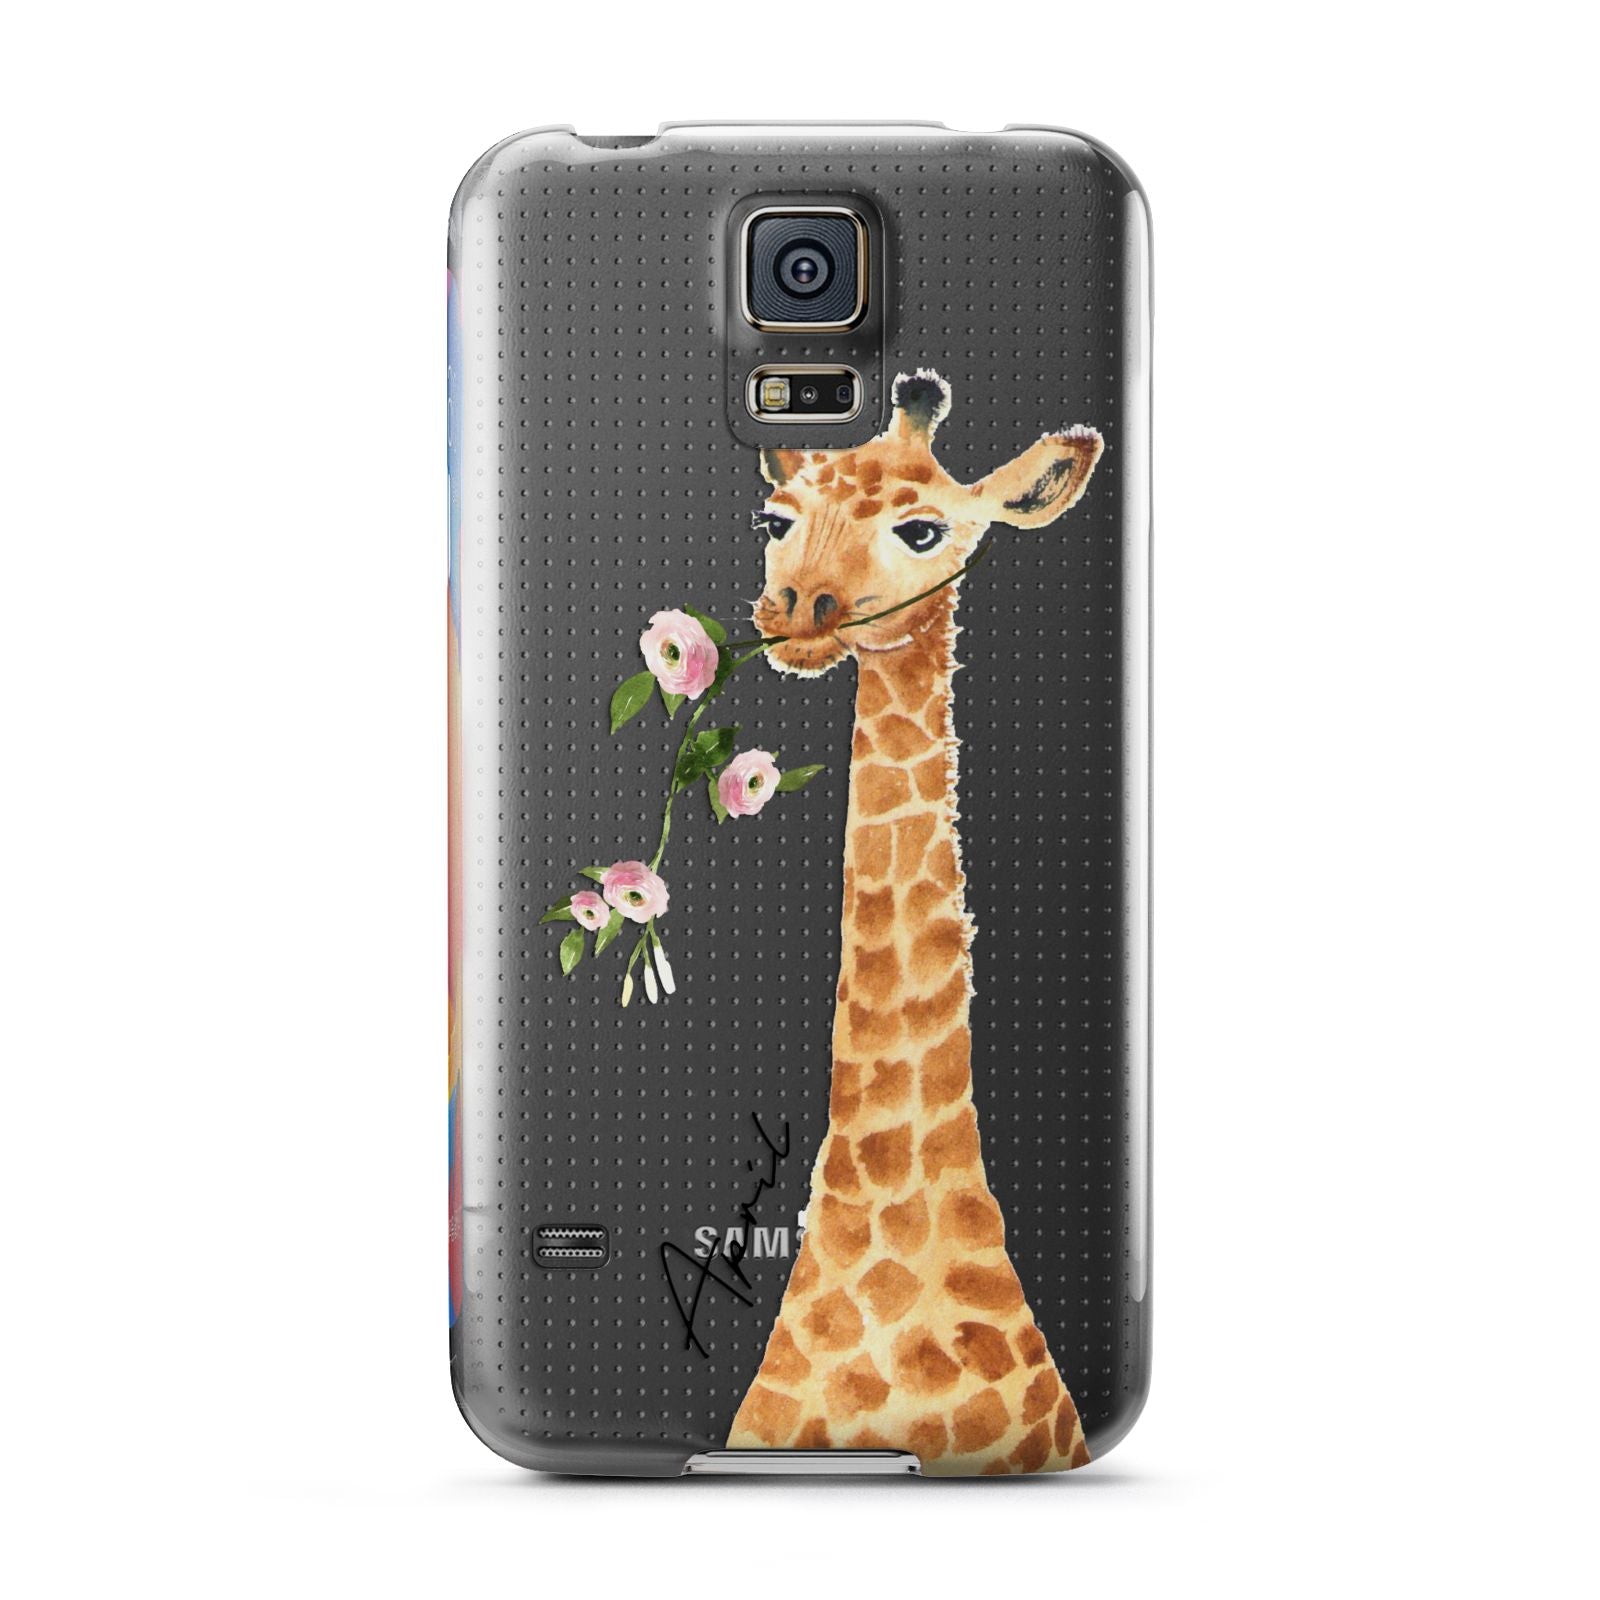 Personalised Giraffe with Name Samsung Galaxy S5 Case